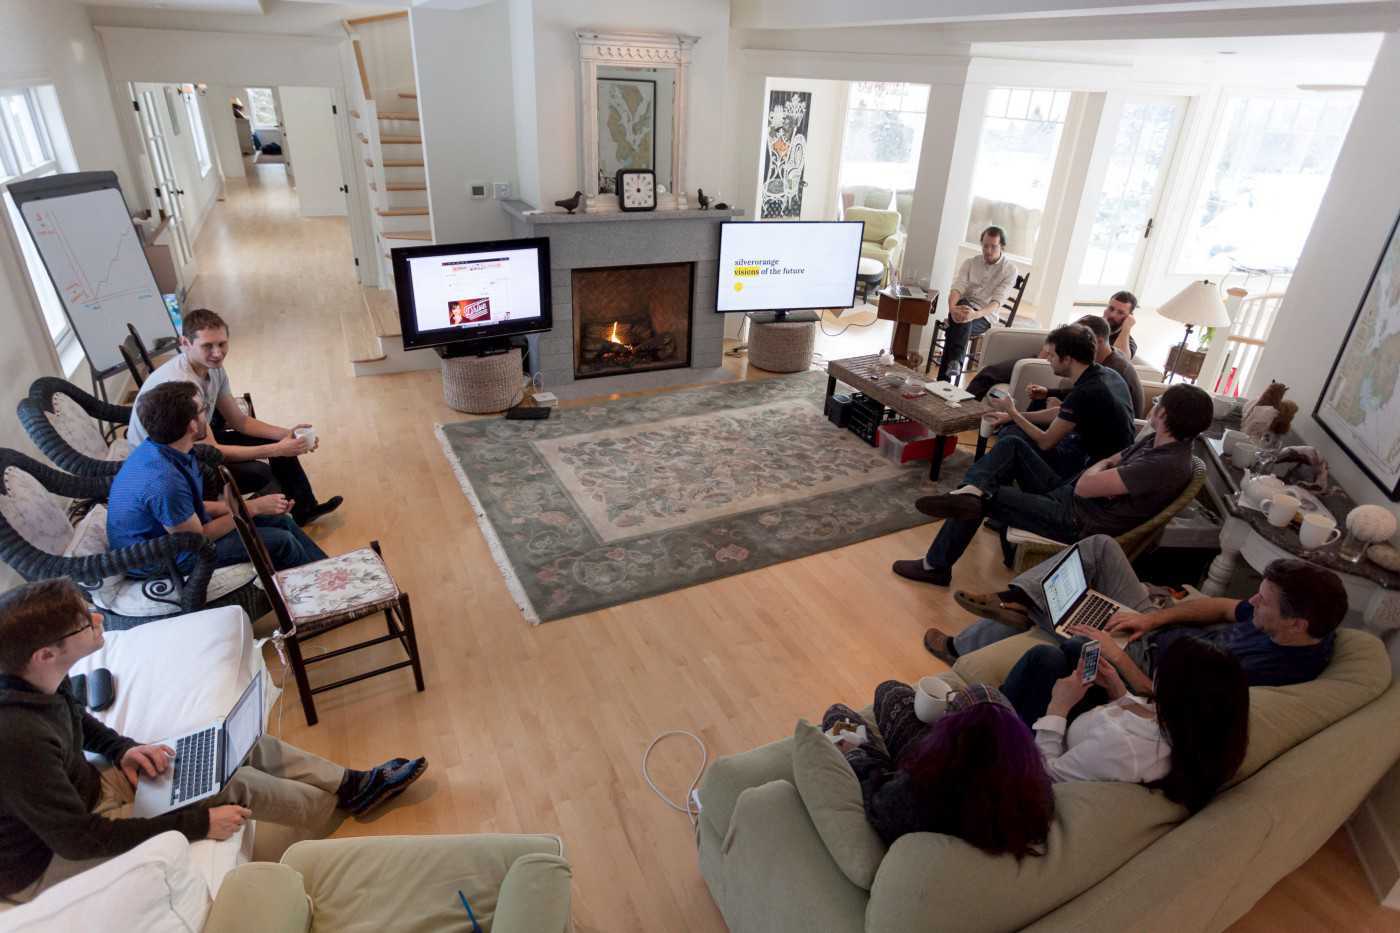 Group sitting around a room with TV screens